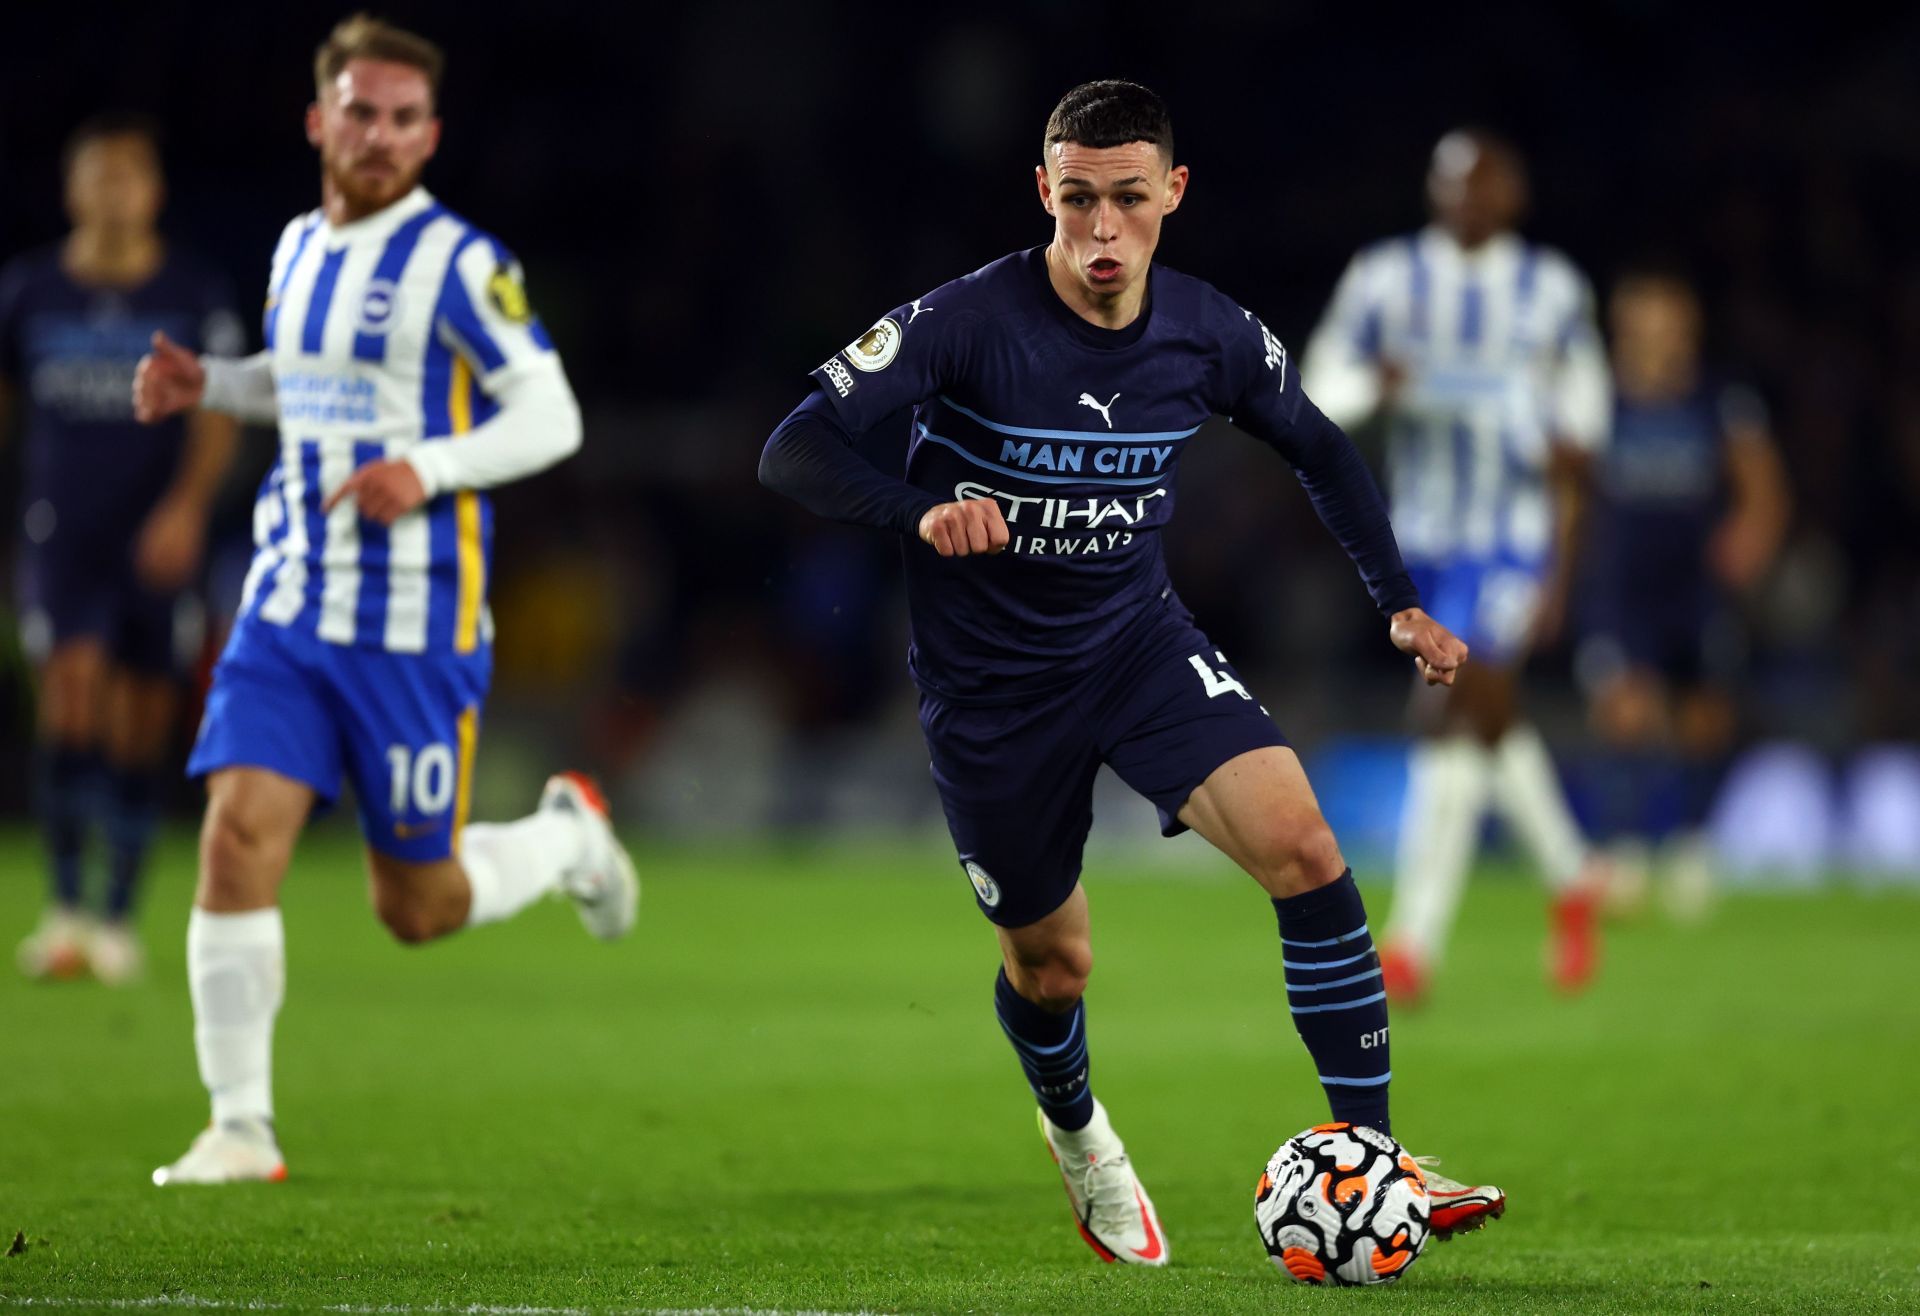 Foden shone in the false 9 role for City, scoring twice and claiming an assist as well,